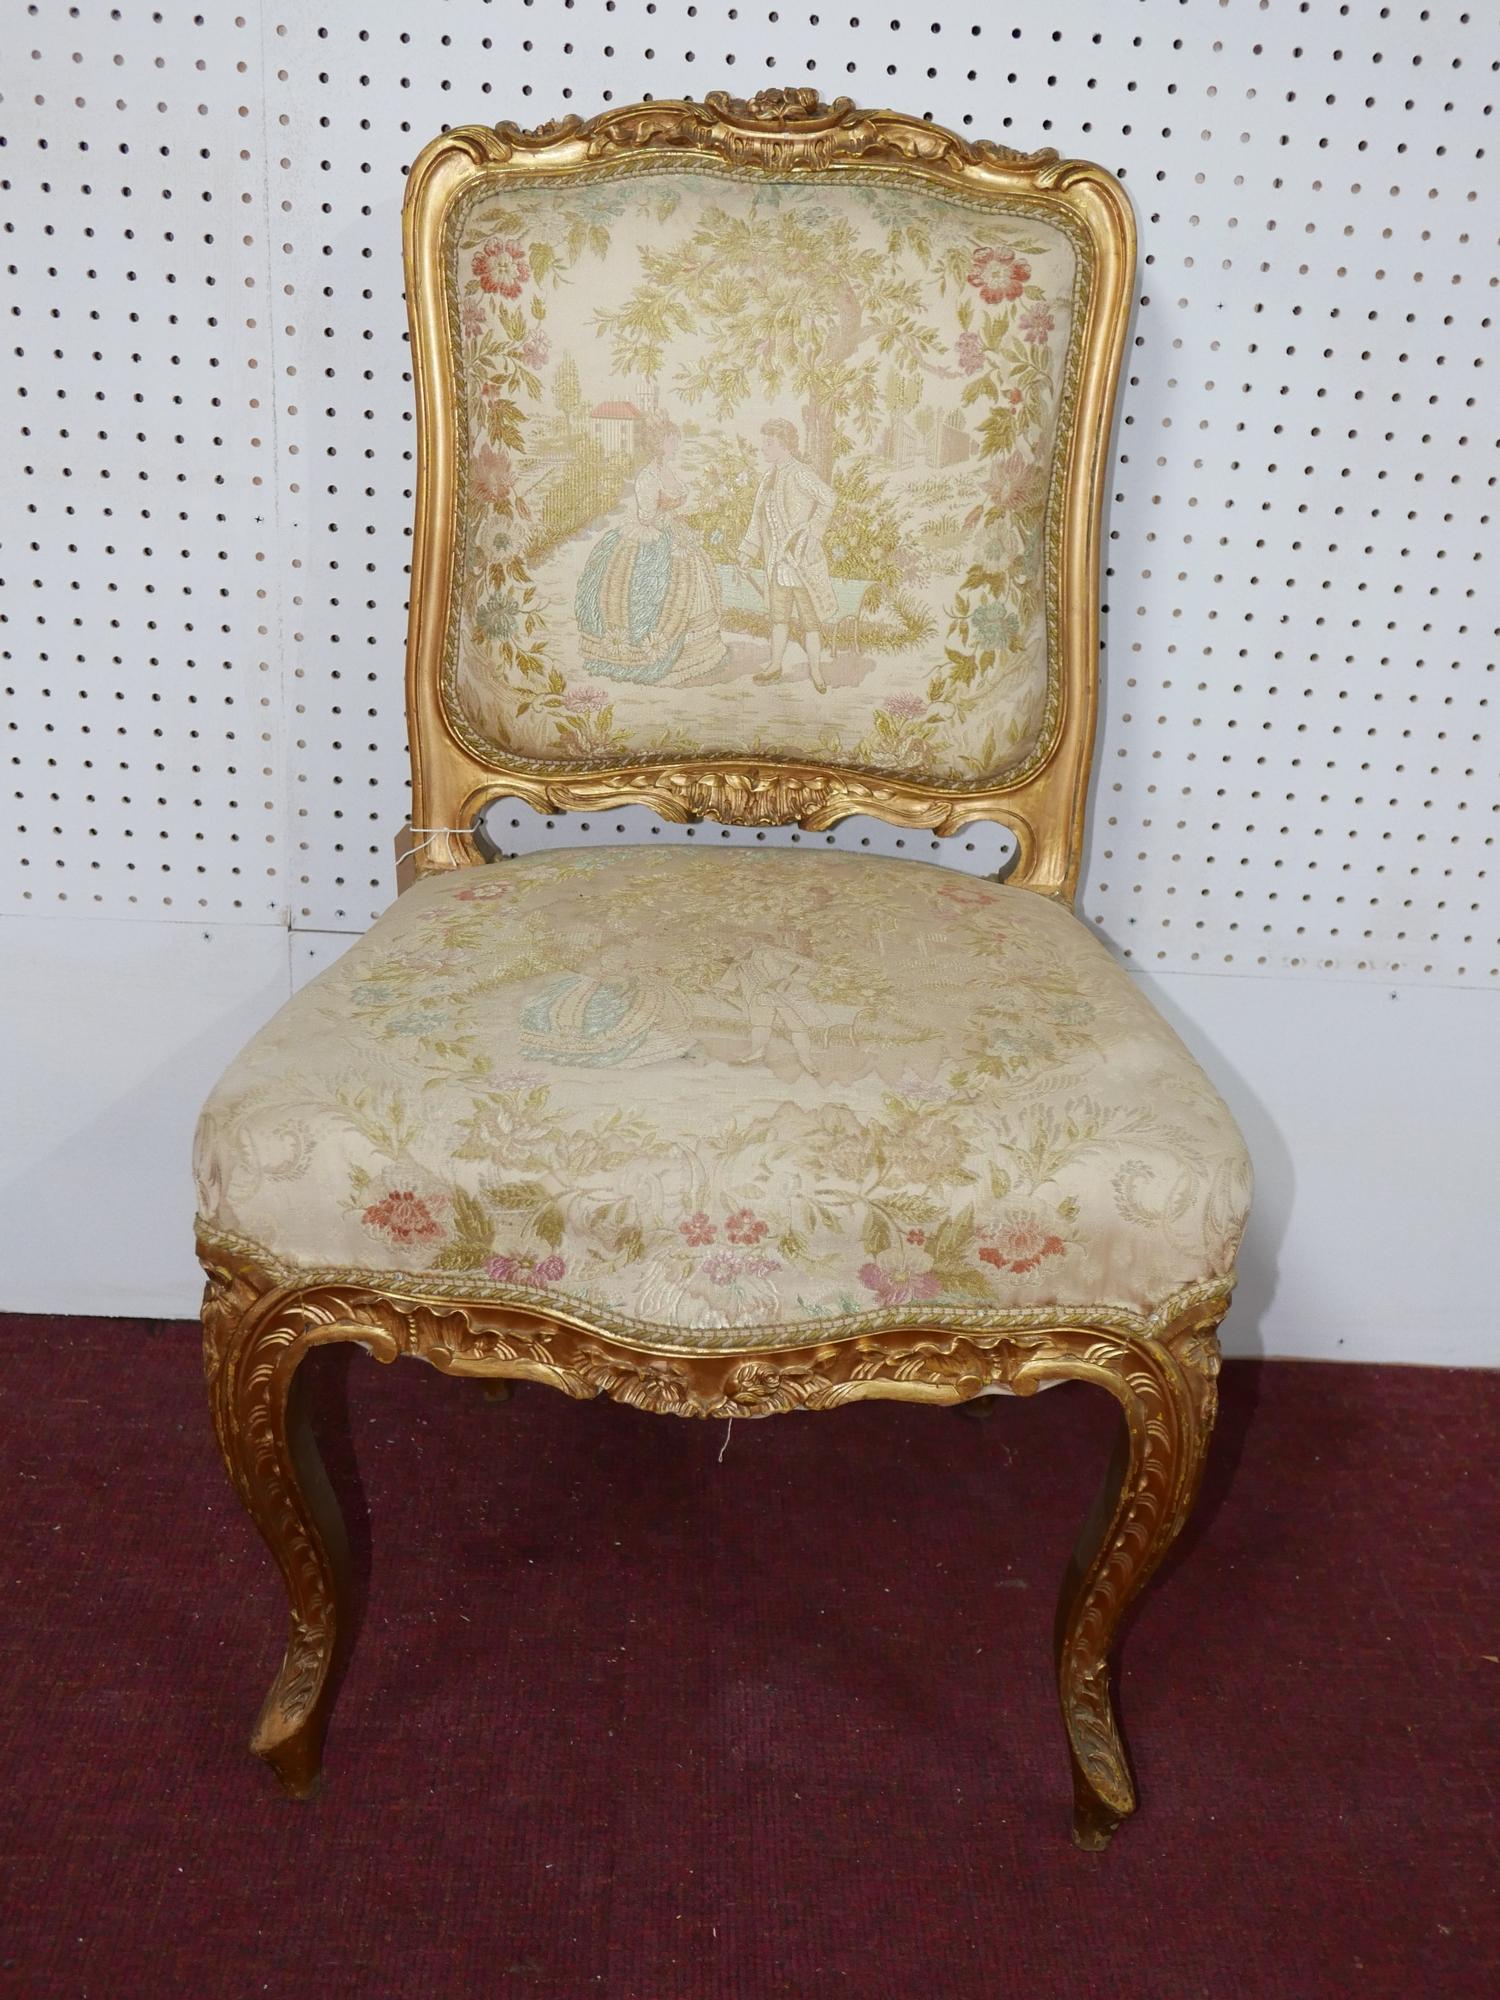 A late 19th / early 20th century Louis XV style side chair, the upholstery decorated with figures